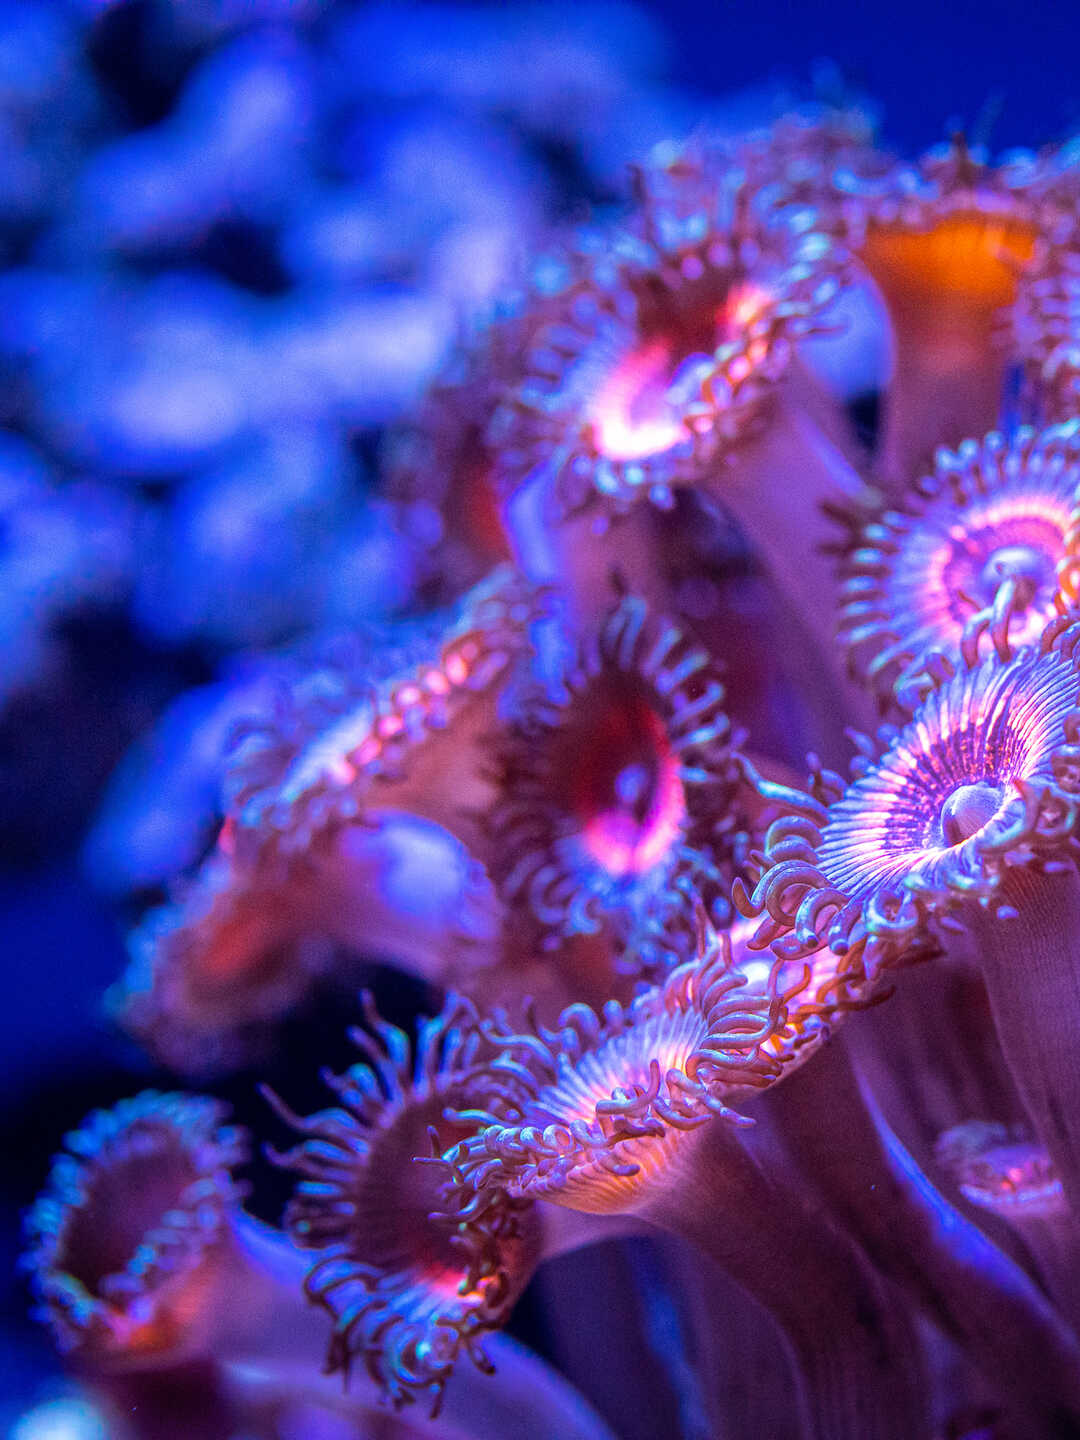 Cluster of purple zoanthid corals on exhibit in Hidden Reef at Cal Academy. Photo by Gayle Laird